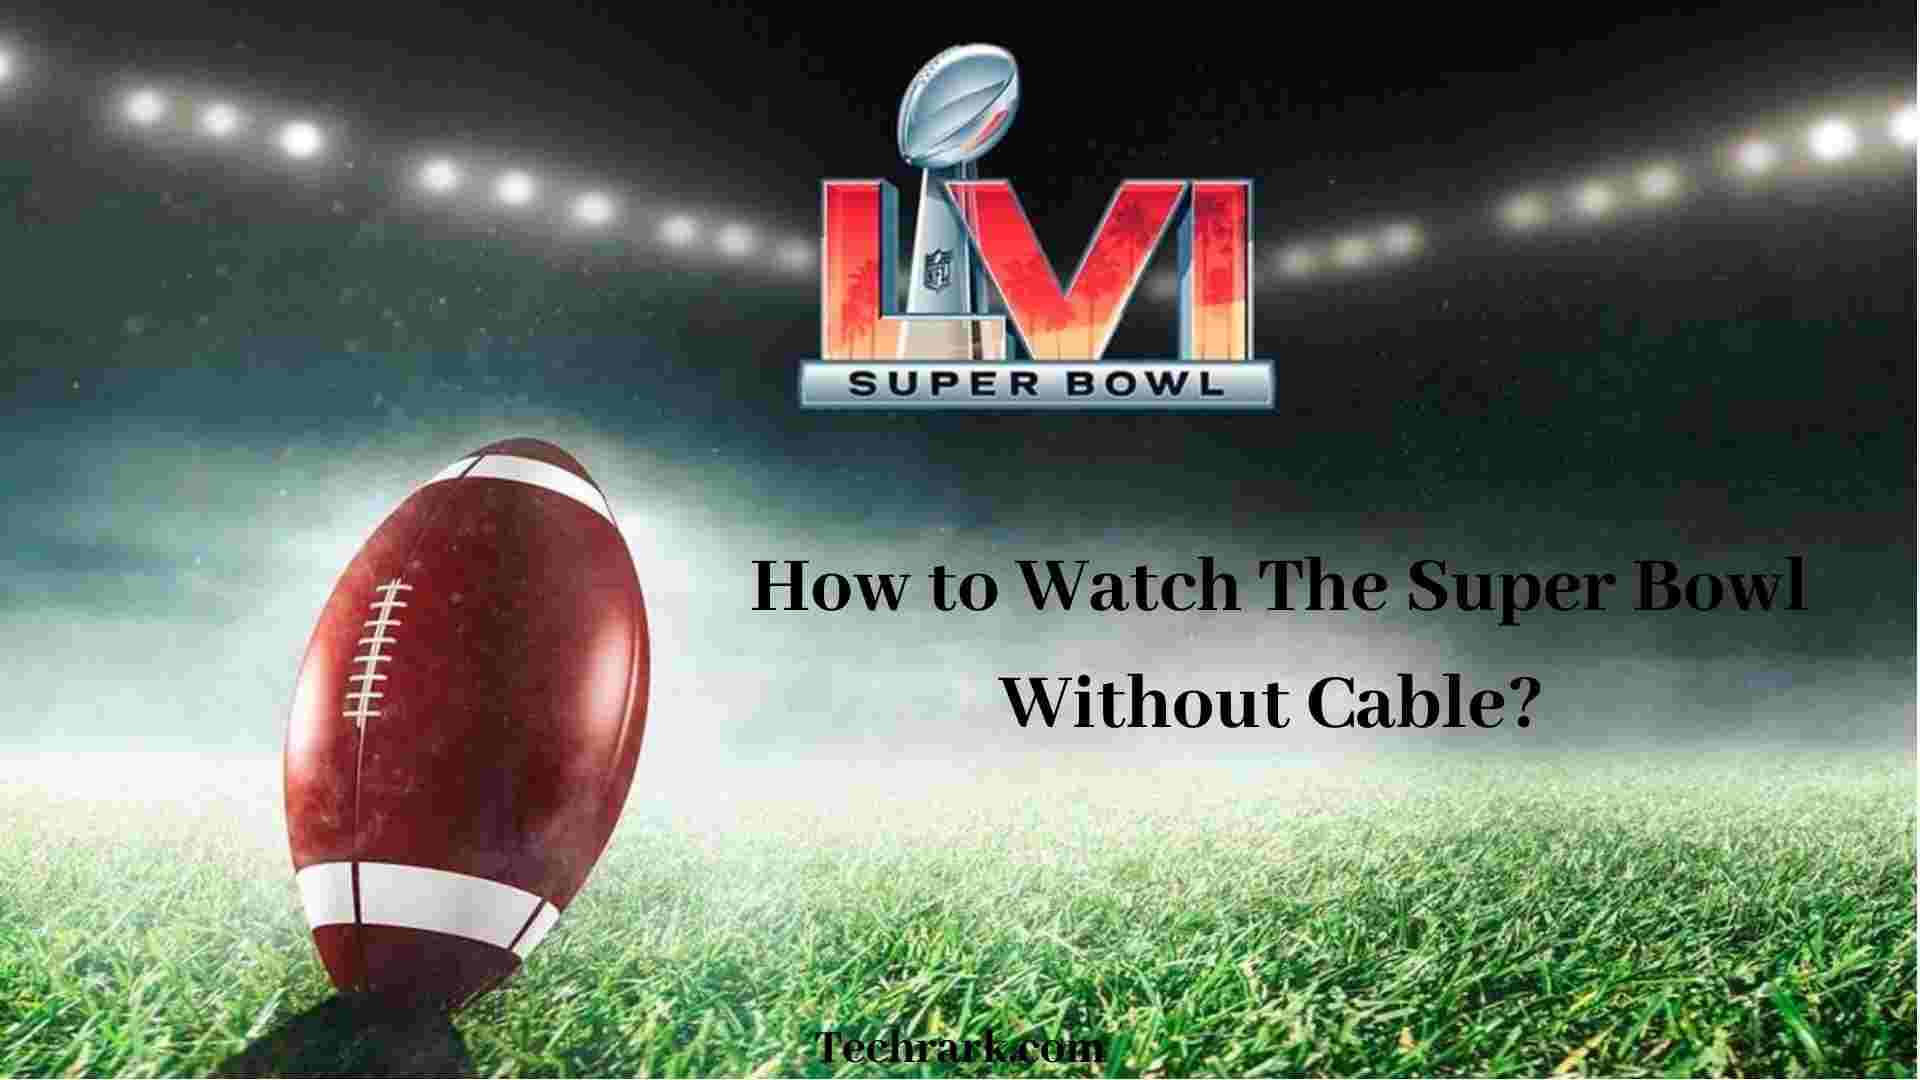 How to Watch The Super Bowl Without Cable